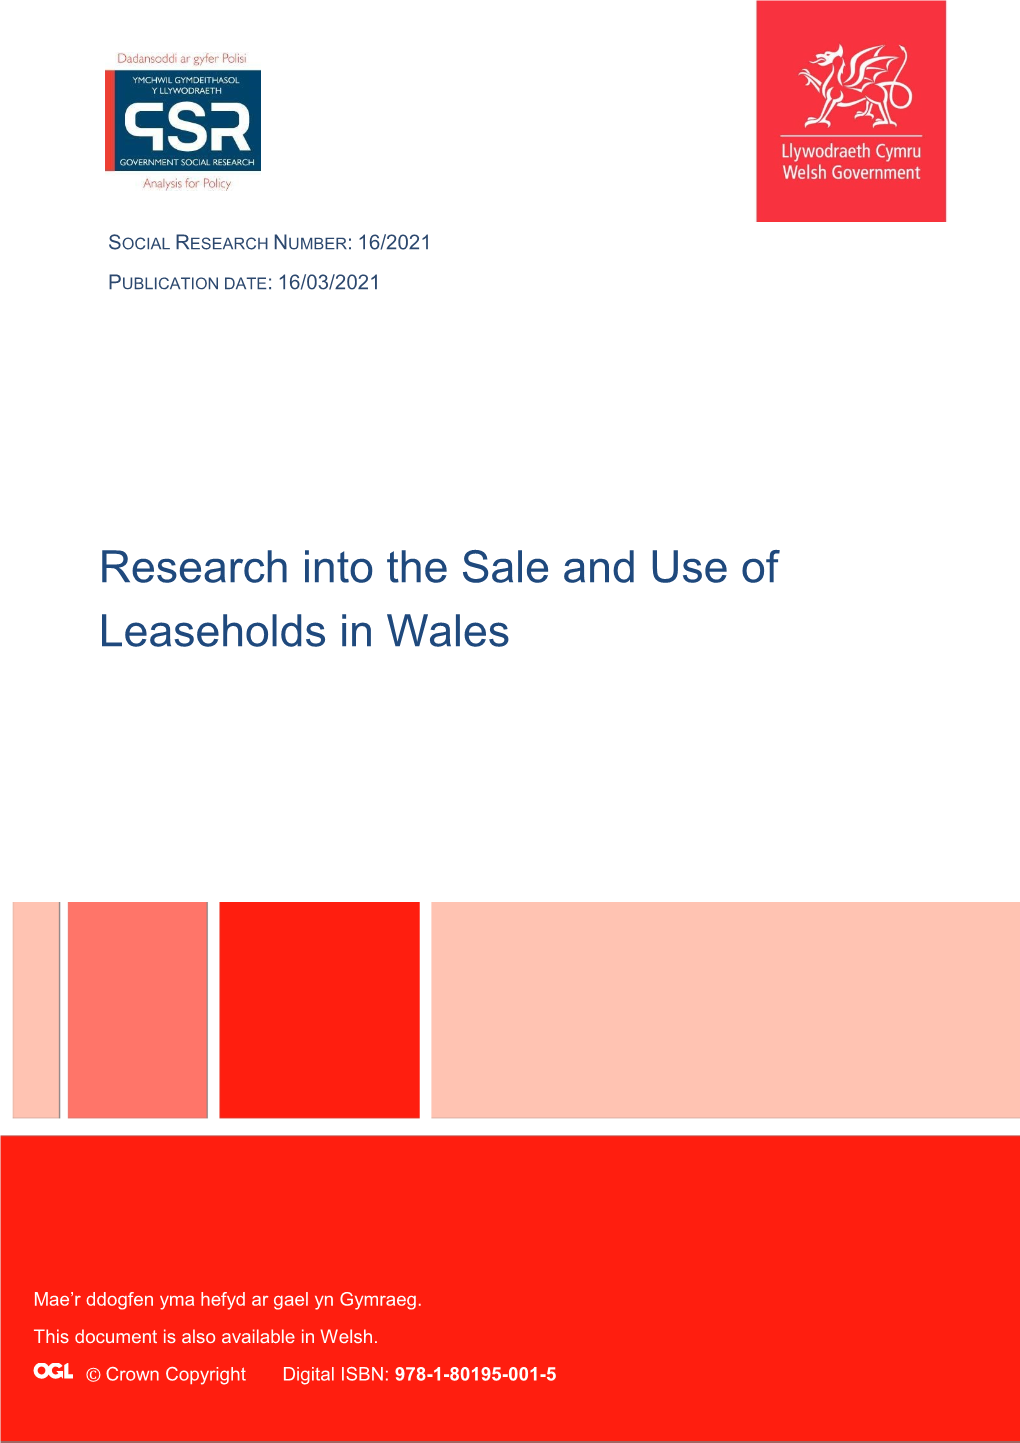 Research Into the Sale and Use of Leaseholds in Wales Subtitle